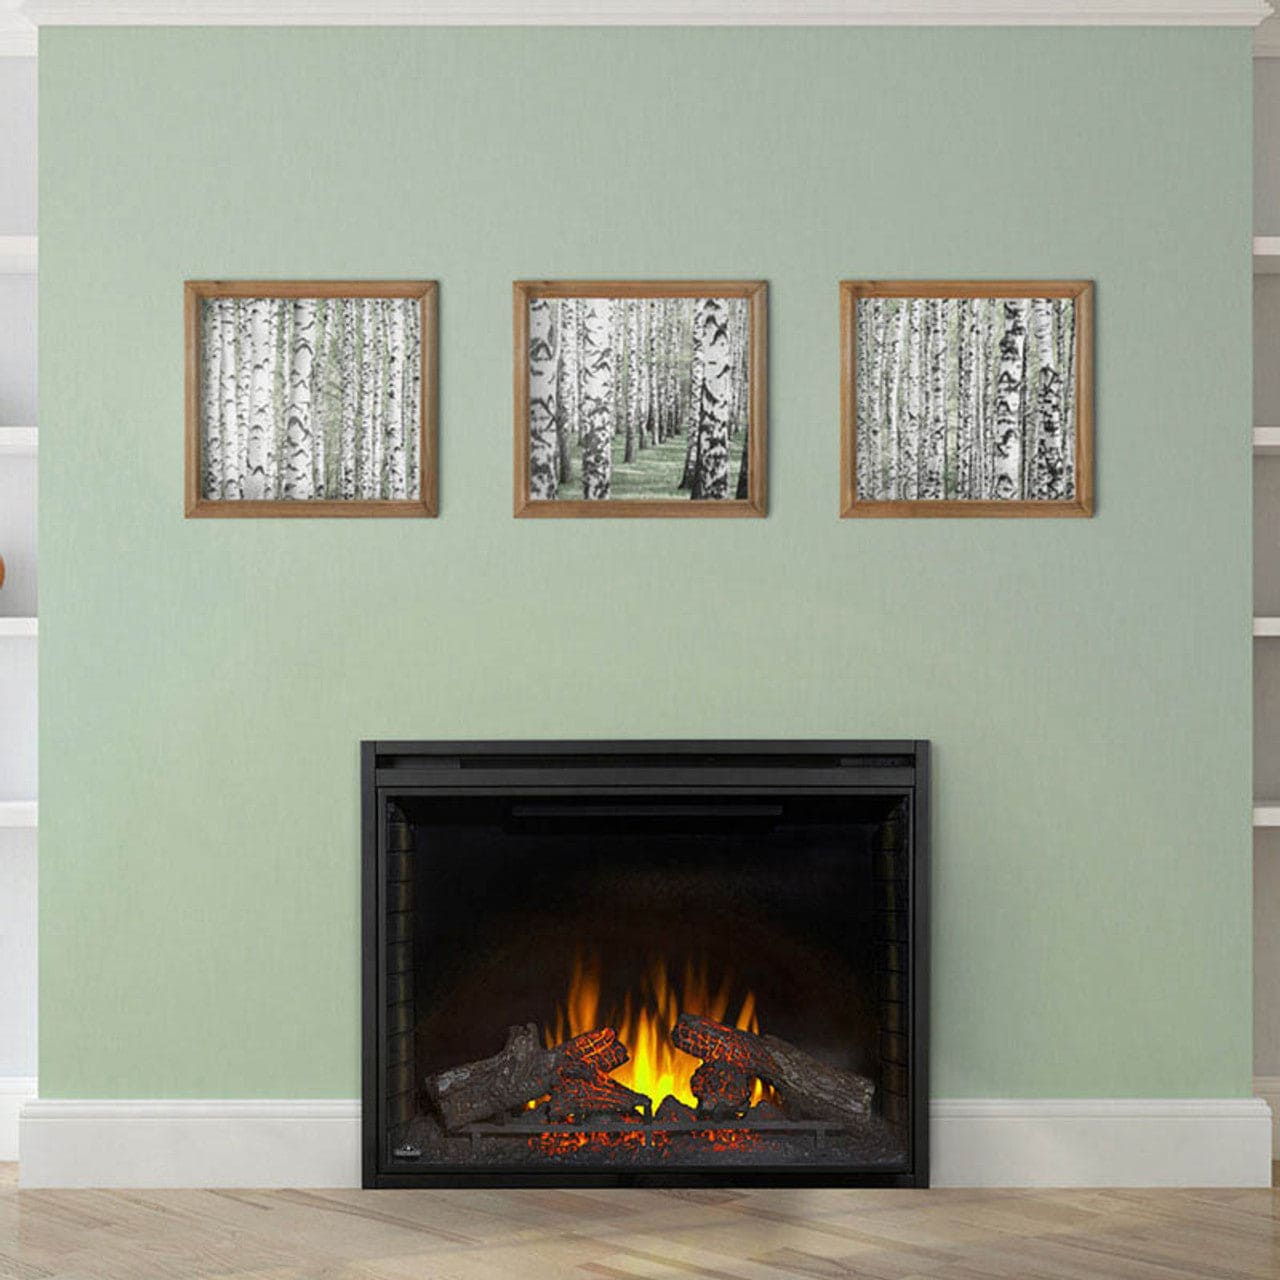 Napoleon Ascent 40 Whisper-Quiet Built-In Electric Fireplace Insert - NEFB40H - Chimney Cricket